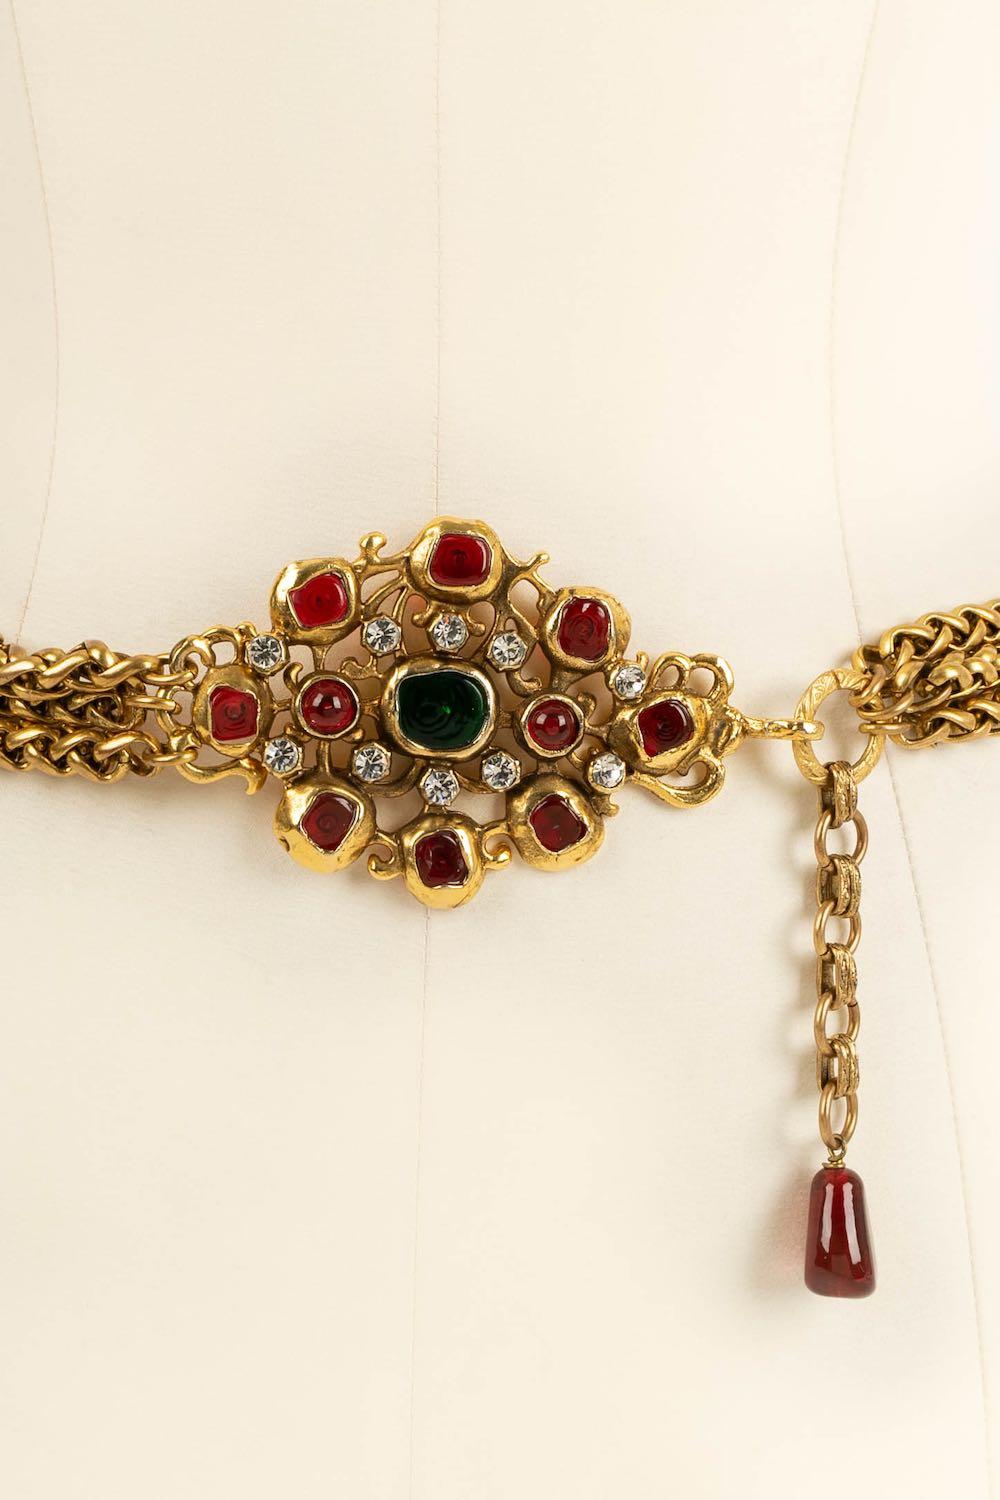 Chanel Byzantine Style Belt in Gold Metal and Colored Glass Paste For Sale 5